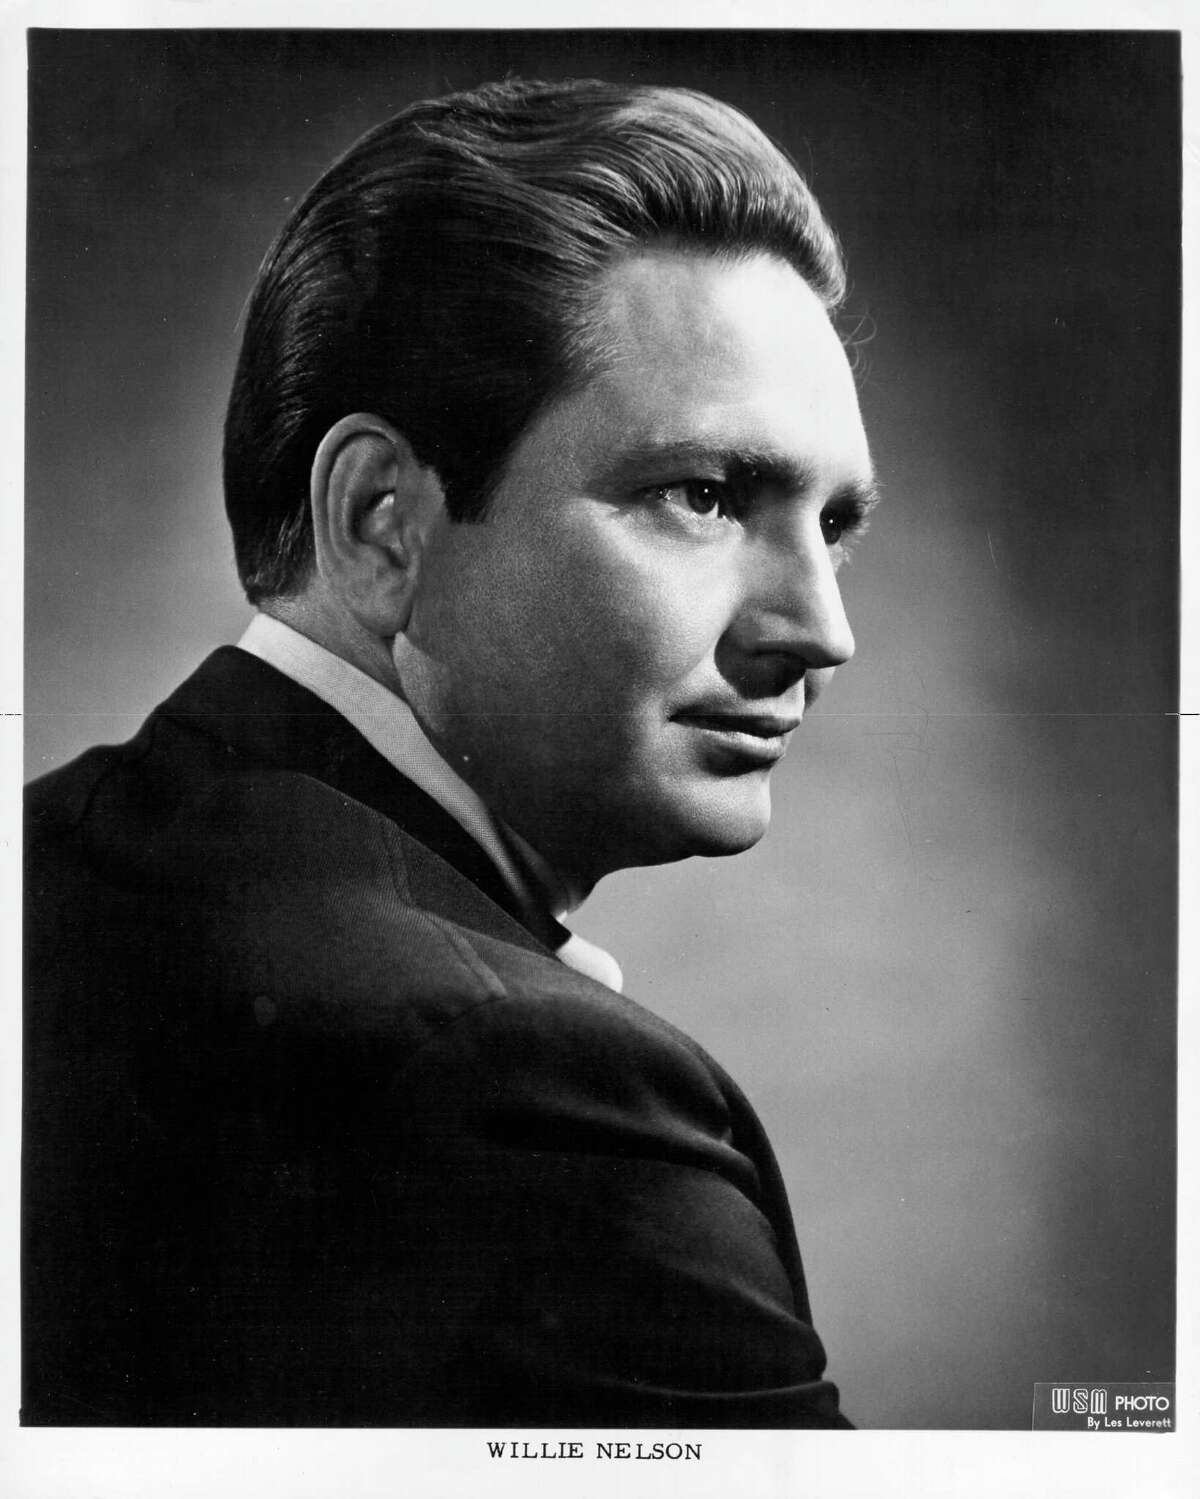 Beardless Willie: An early publicity still for Willie Nelson circa 1965. Nelson wrote some of his best songs in the 1960s, but his albums -- often overproduced with strings -- didn't sell well.